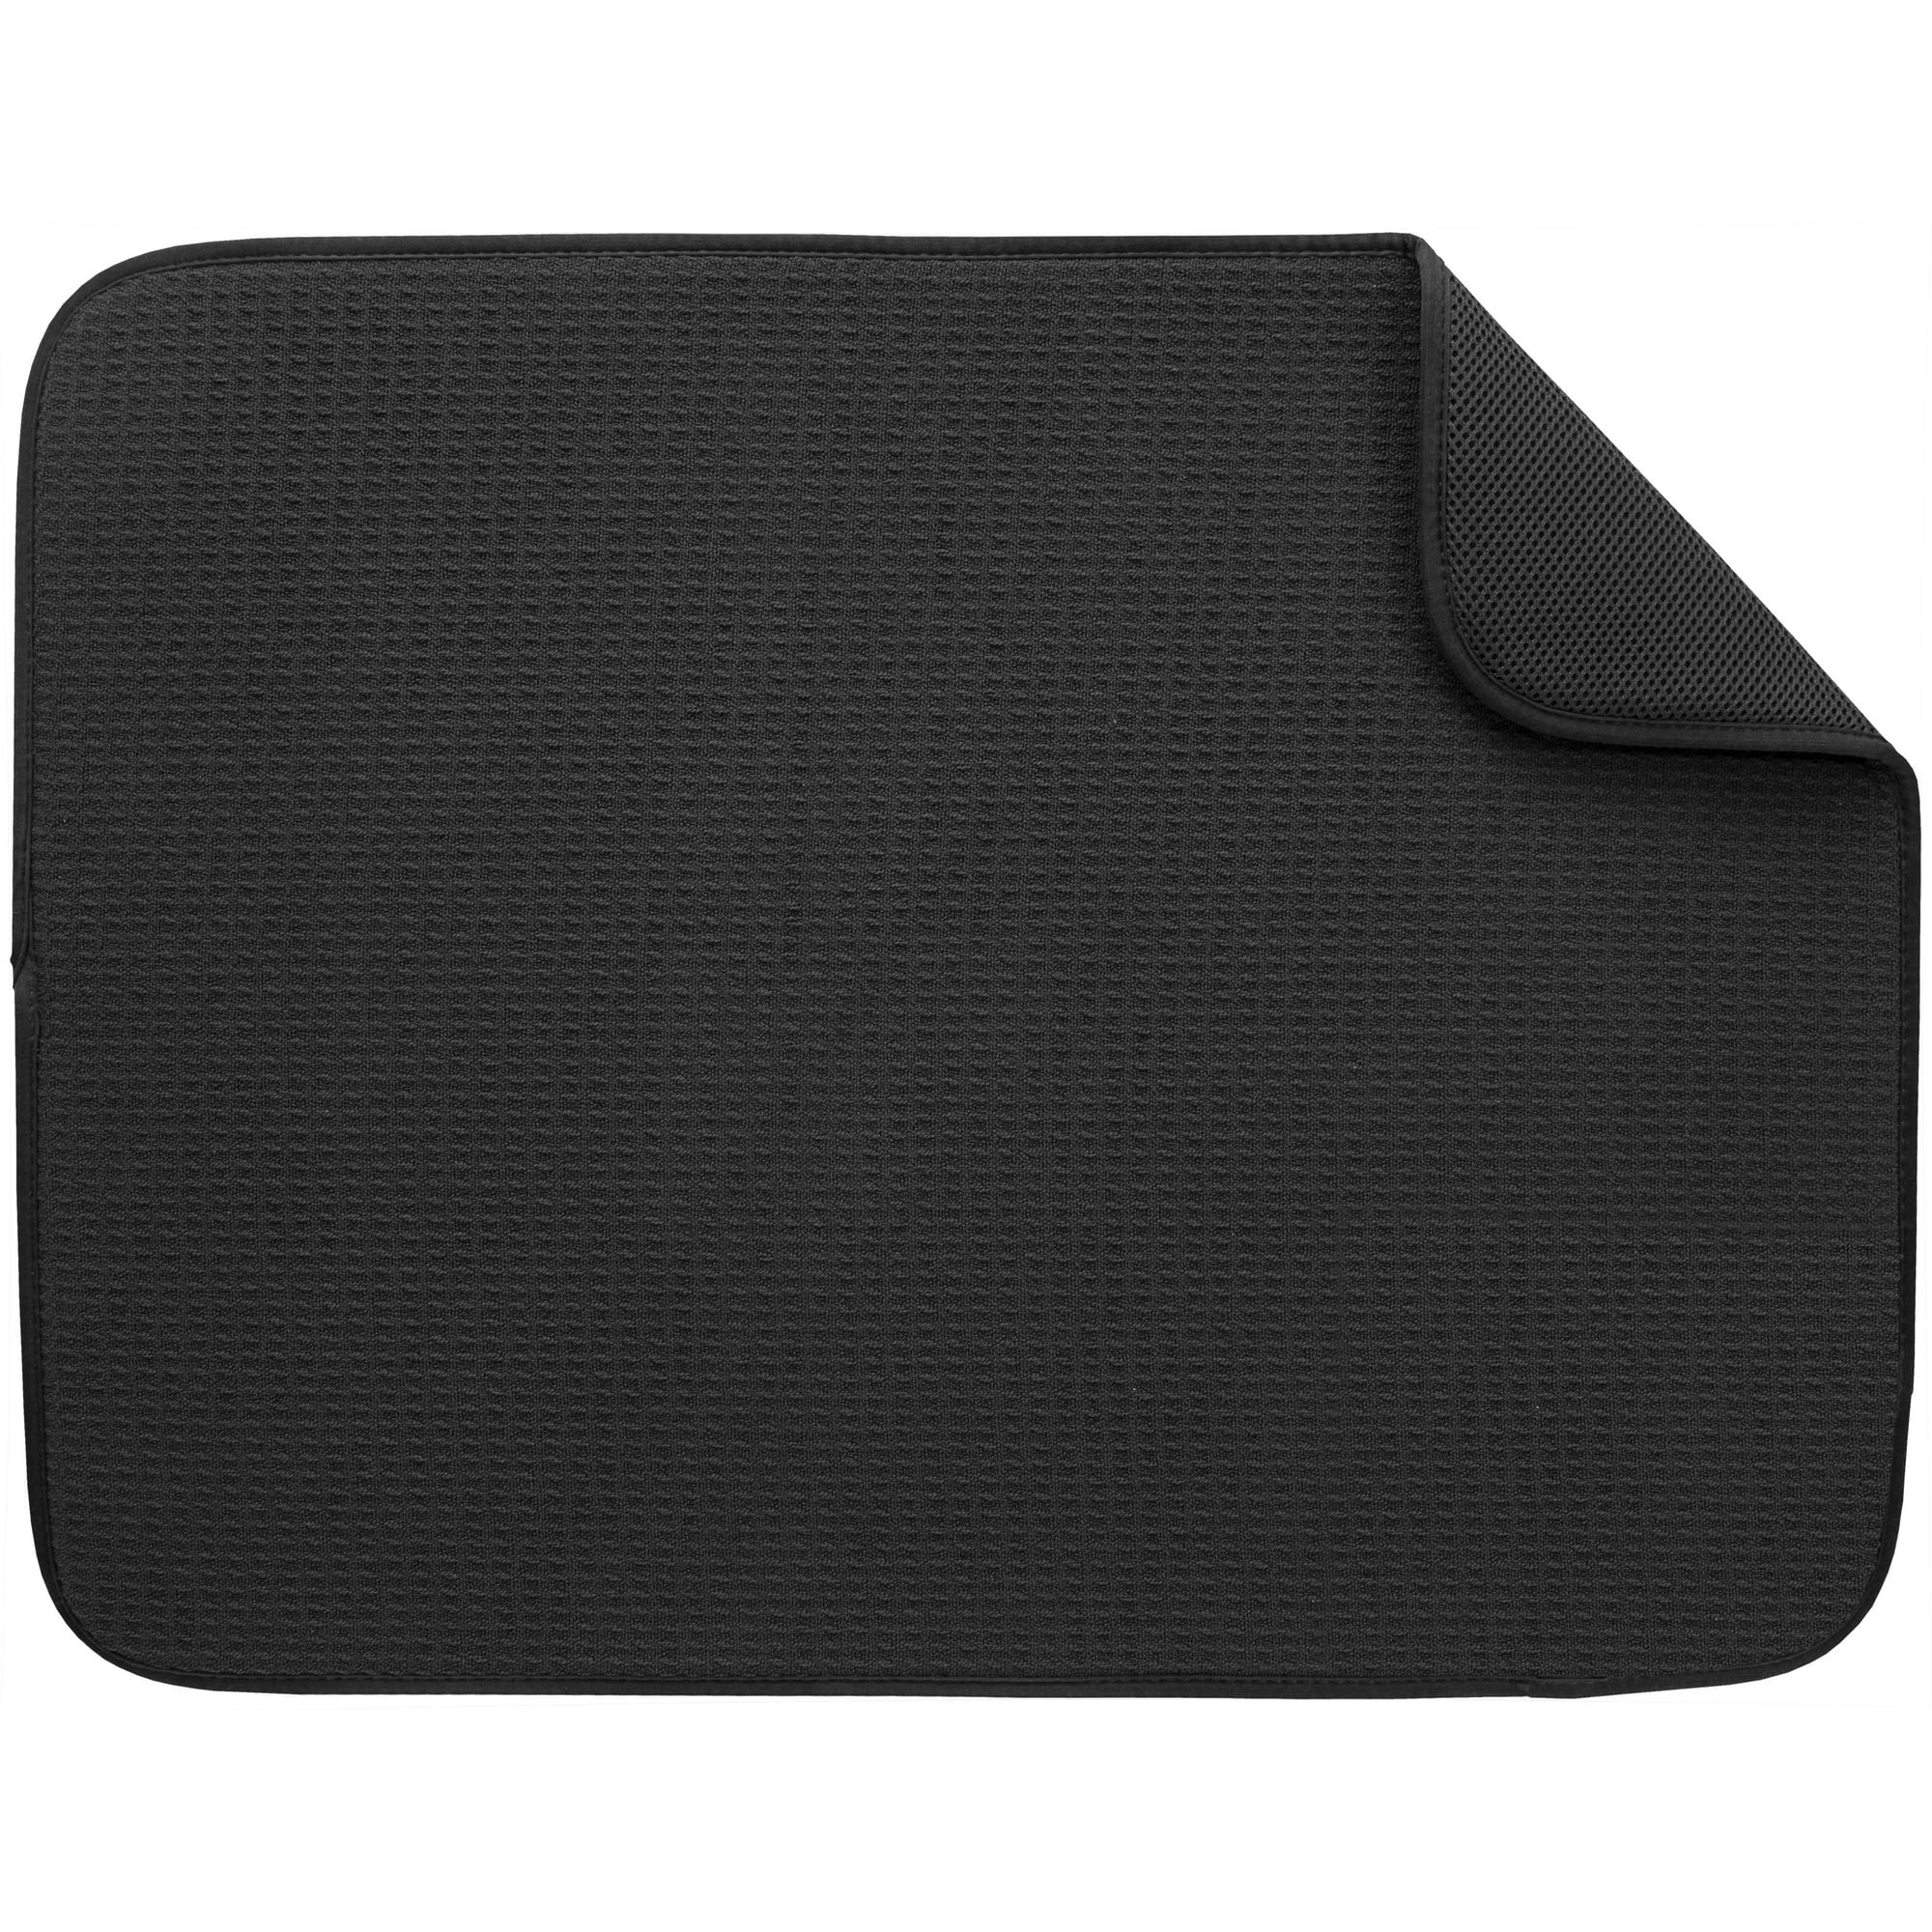 Wholesale prices with free shipping all over United States Mainstays Microfiber Dish Drying Mat Black - Steven Deals